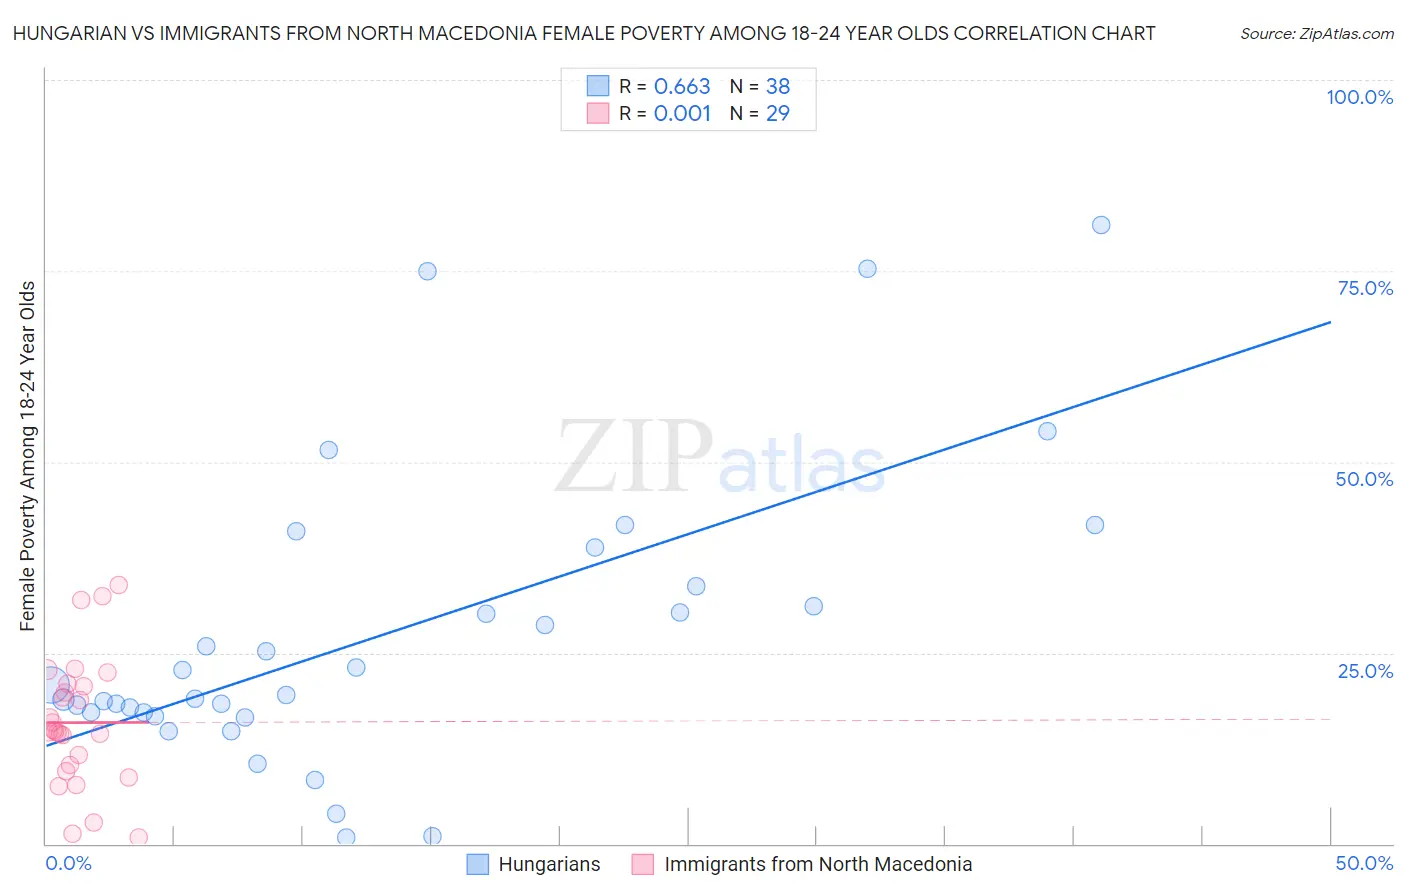 Hungarian vs Immigrants from North Macedonia Female Poverty Among 18-24 Year Olds